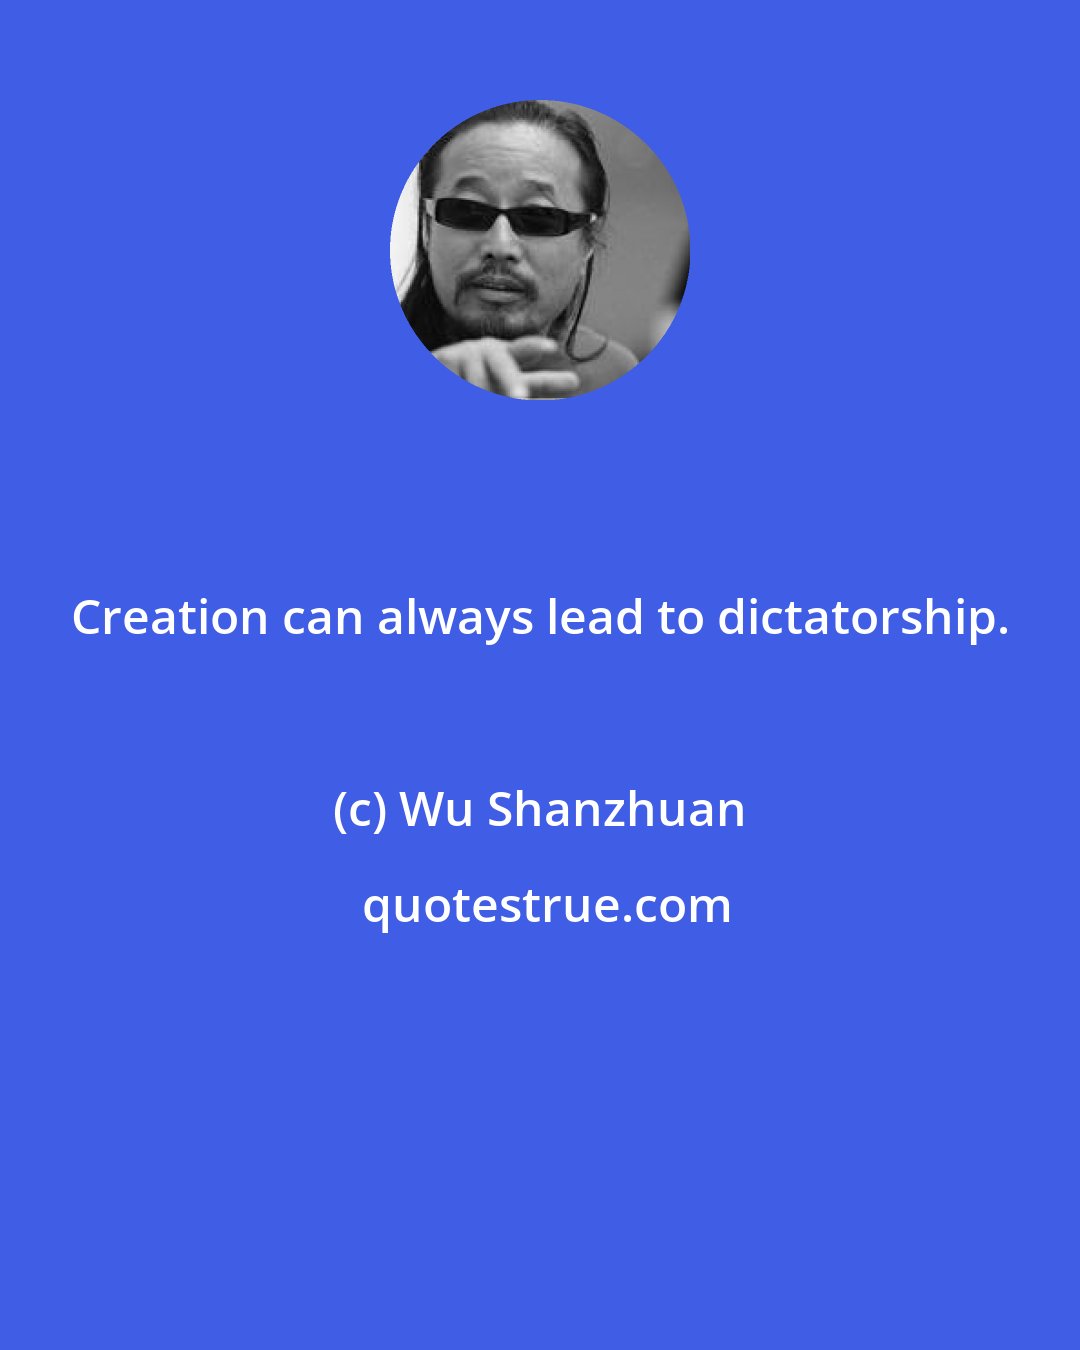 Wu Shanzhuan: Creation can always lead to dictatorship.